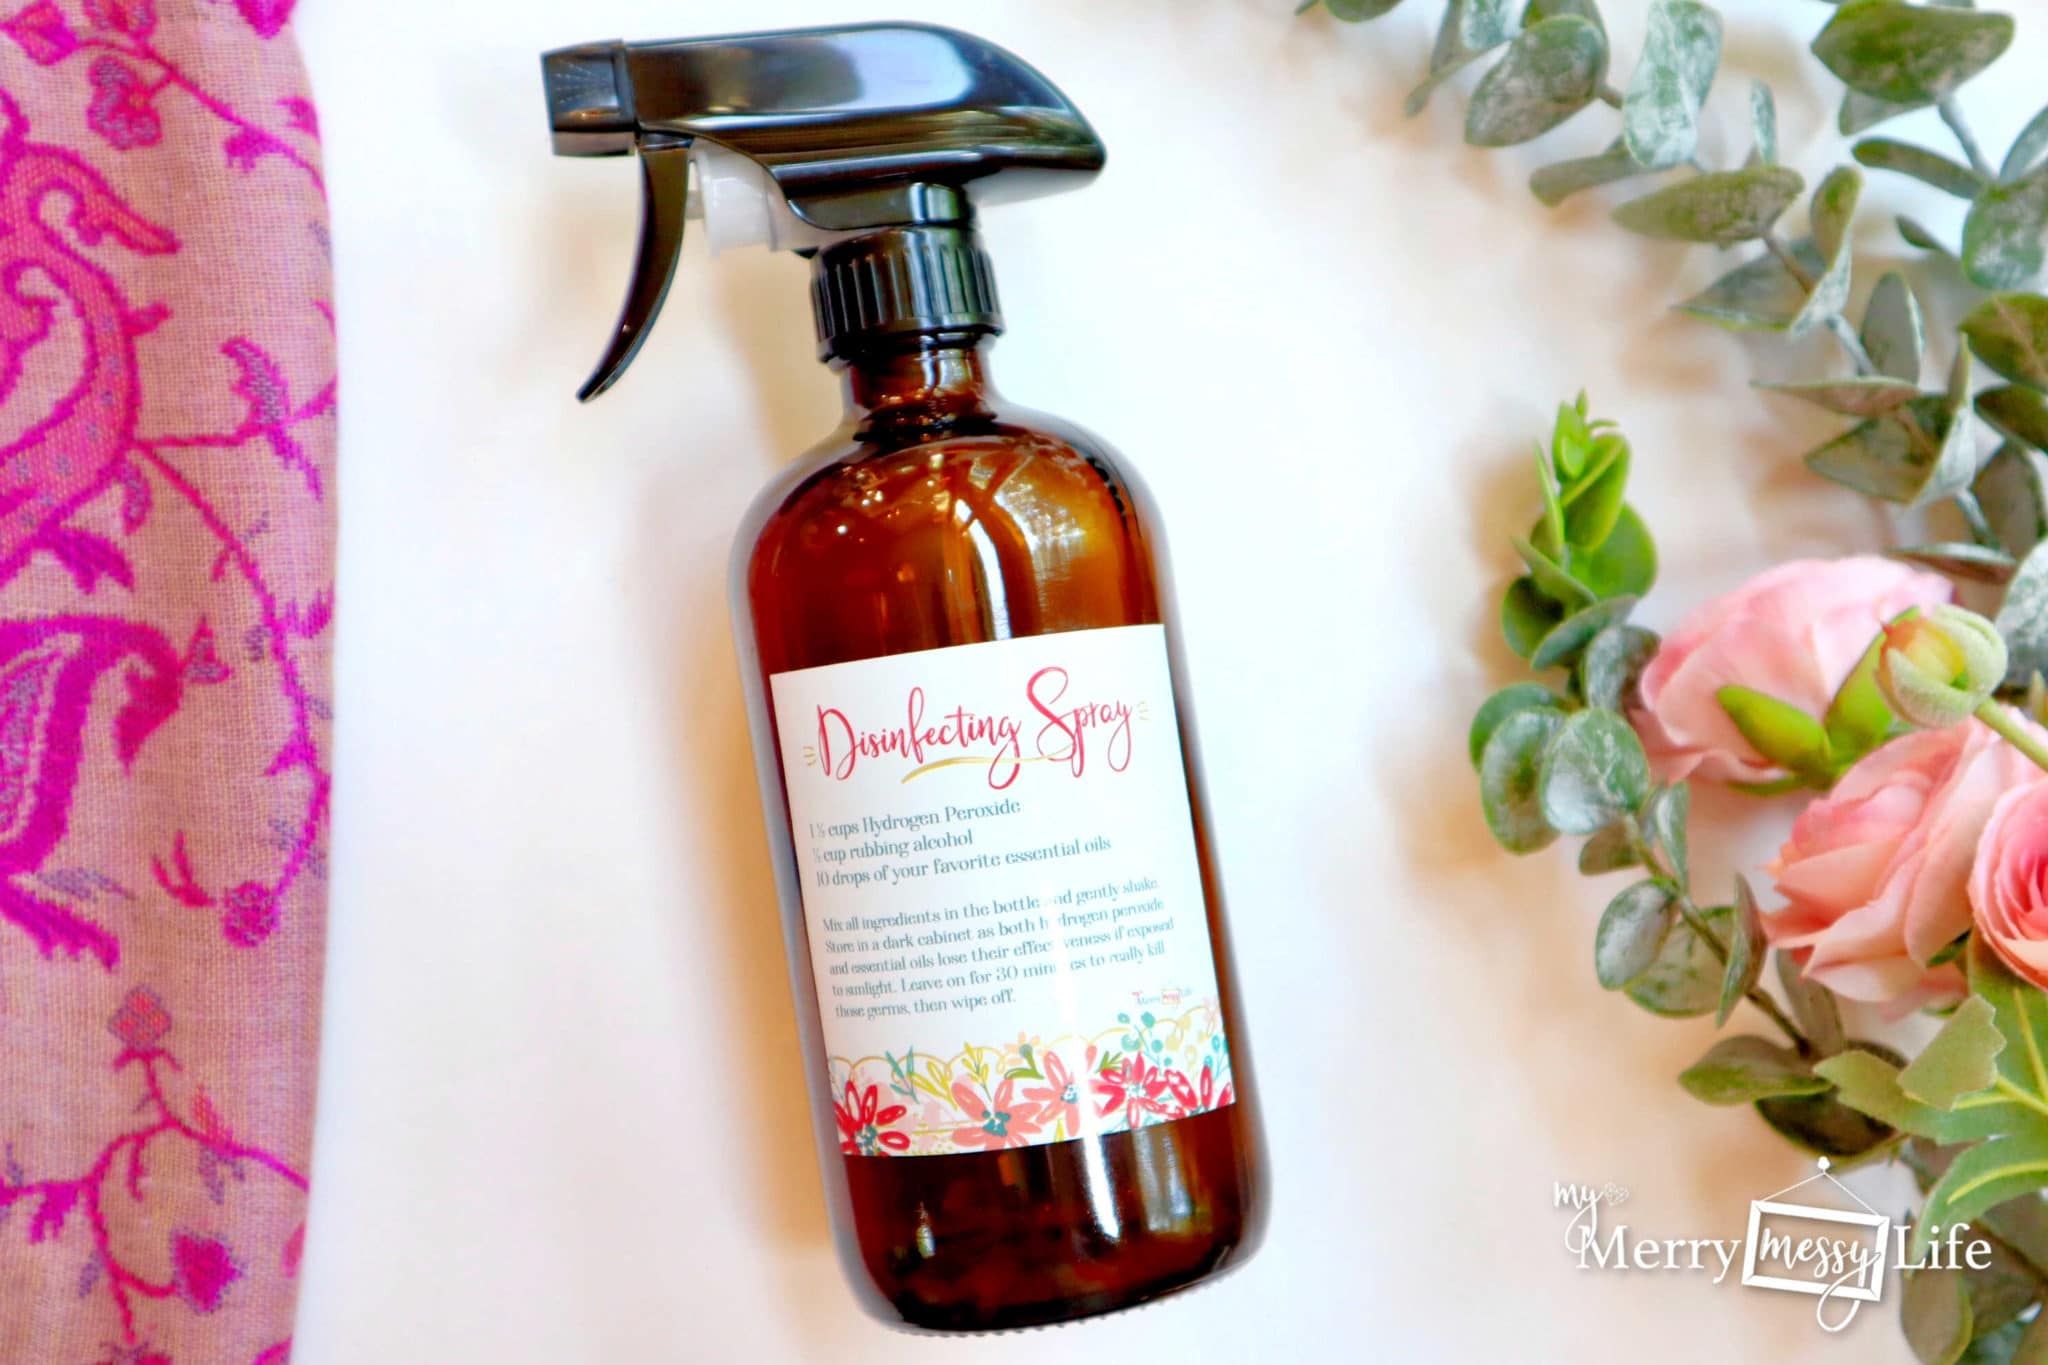 Easy Natural Disinfecting Spray to Make at Home